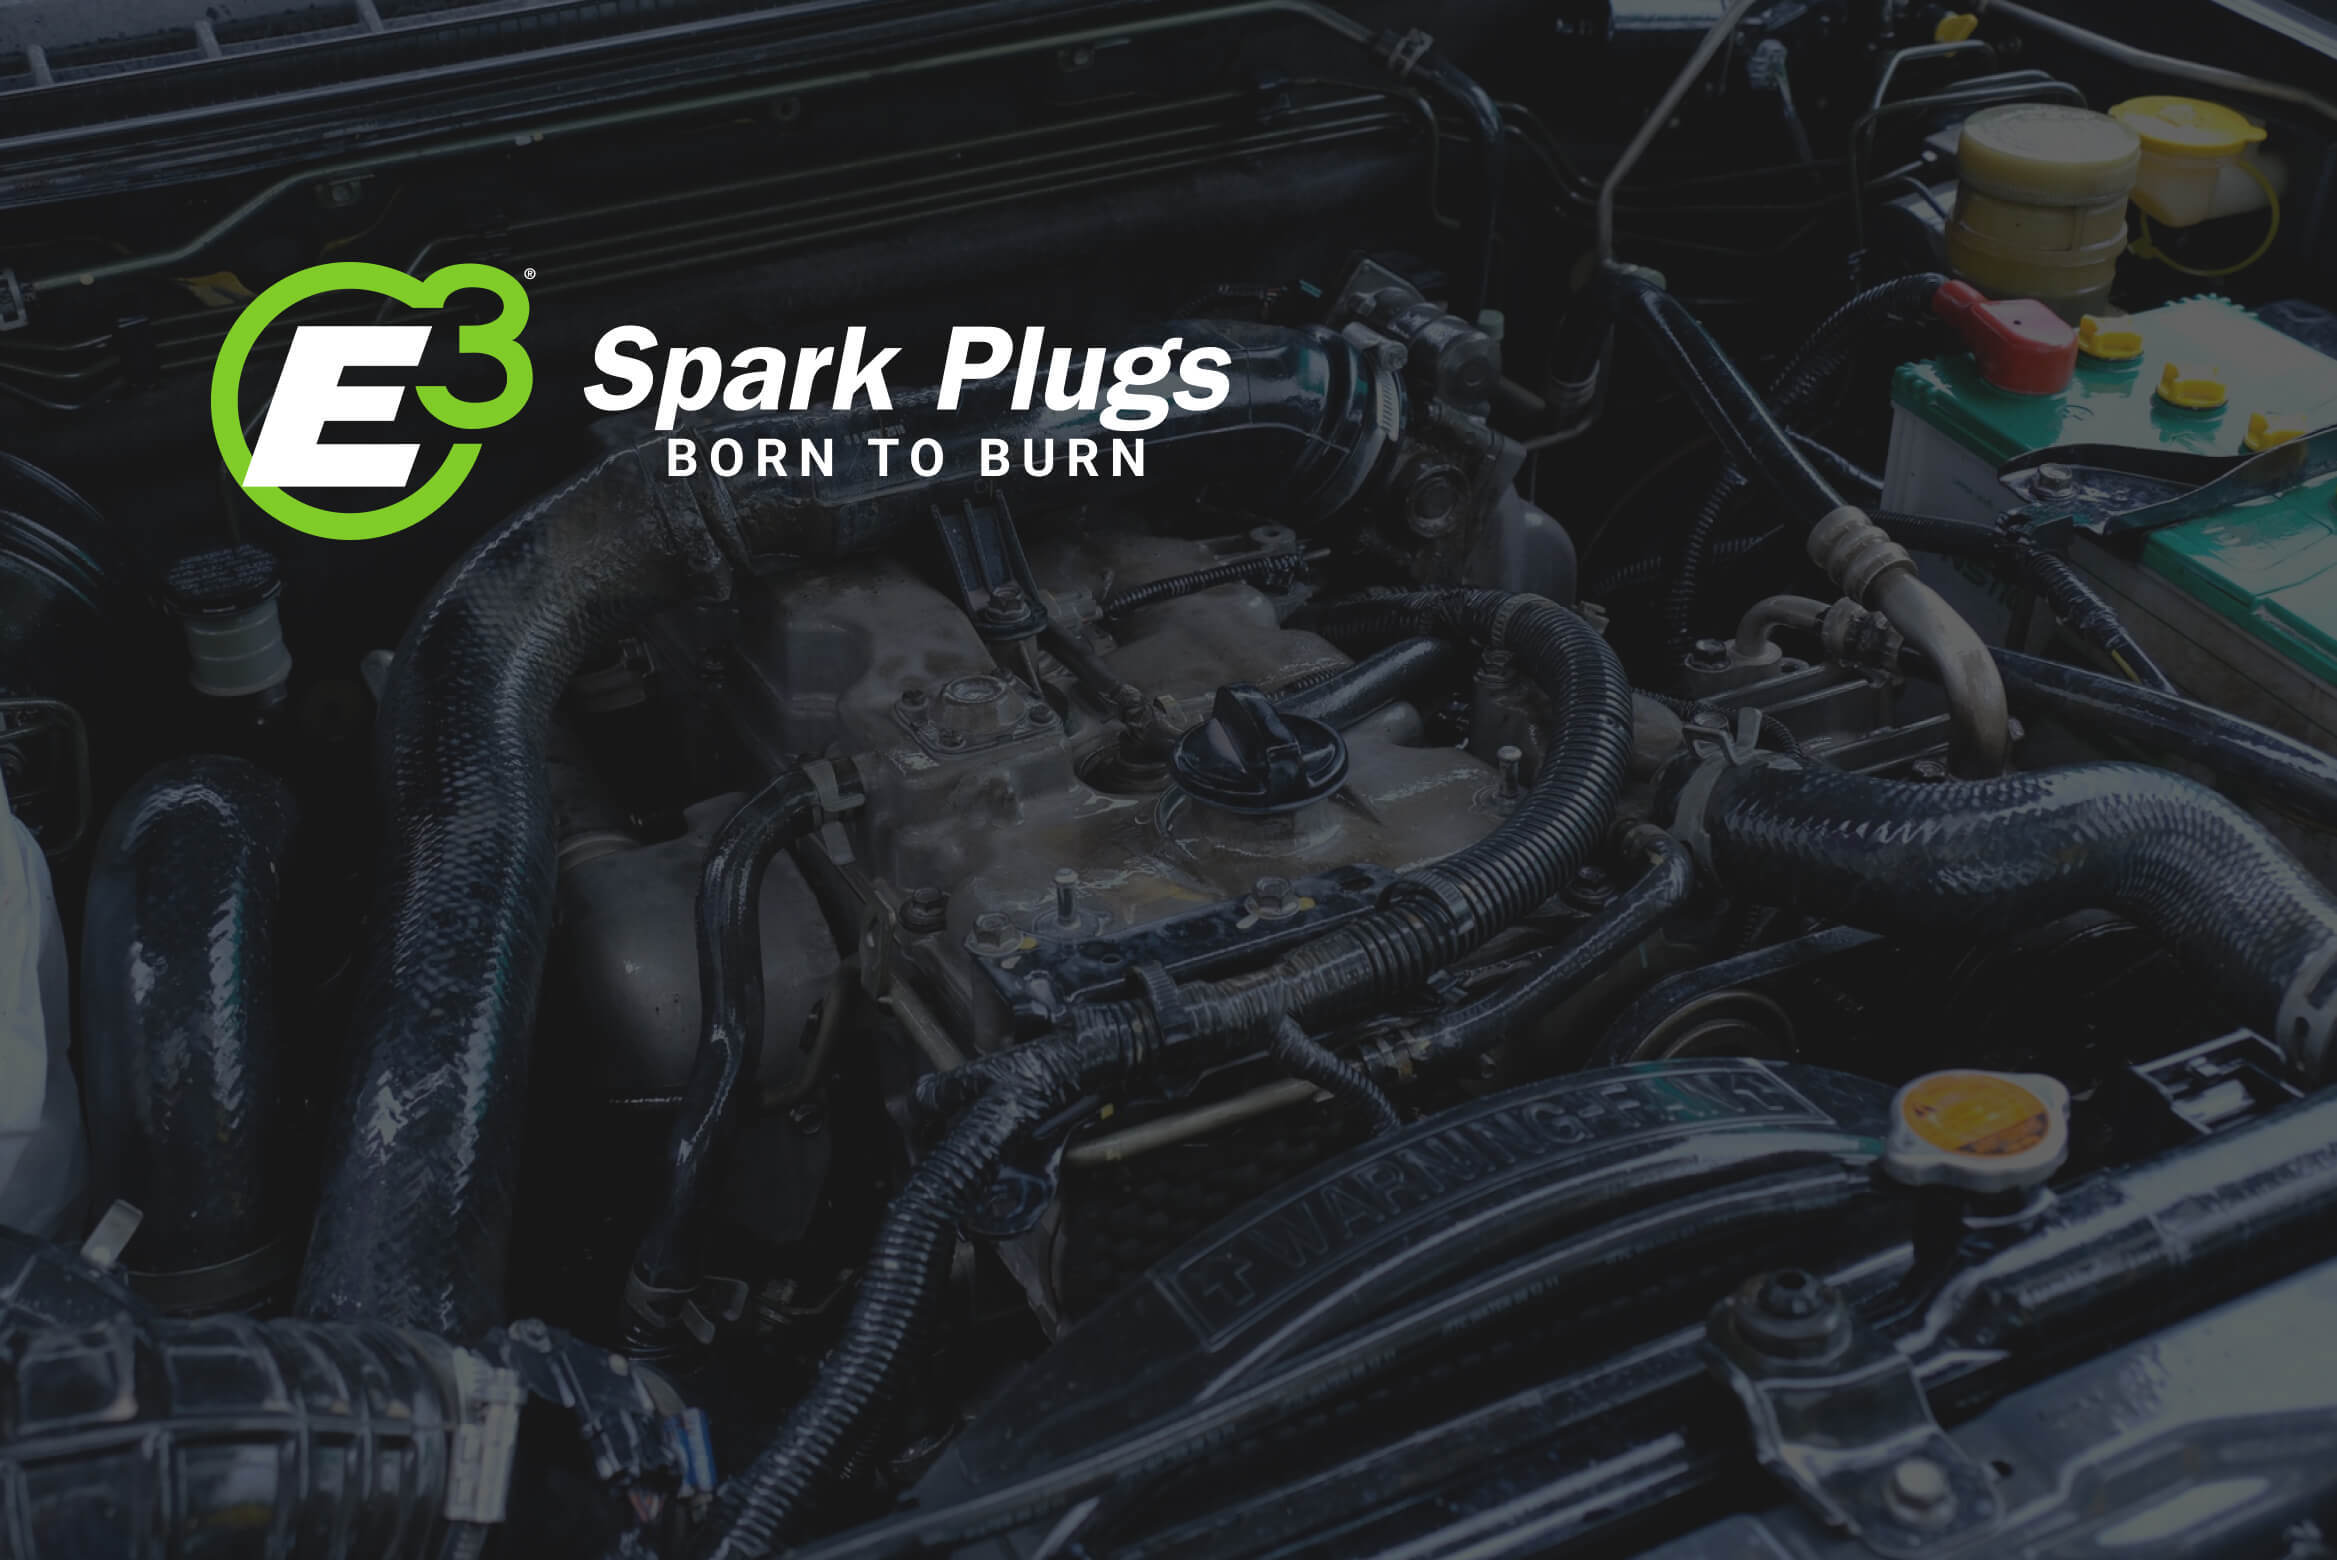 OEM Spark Plugs vs. Aftermarket Options: What To Know